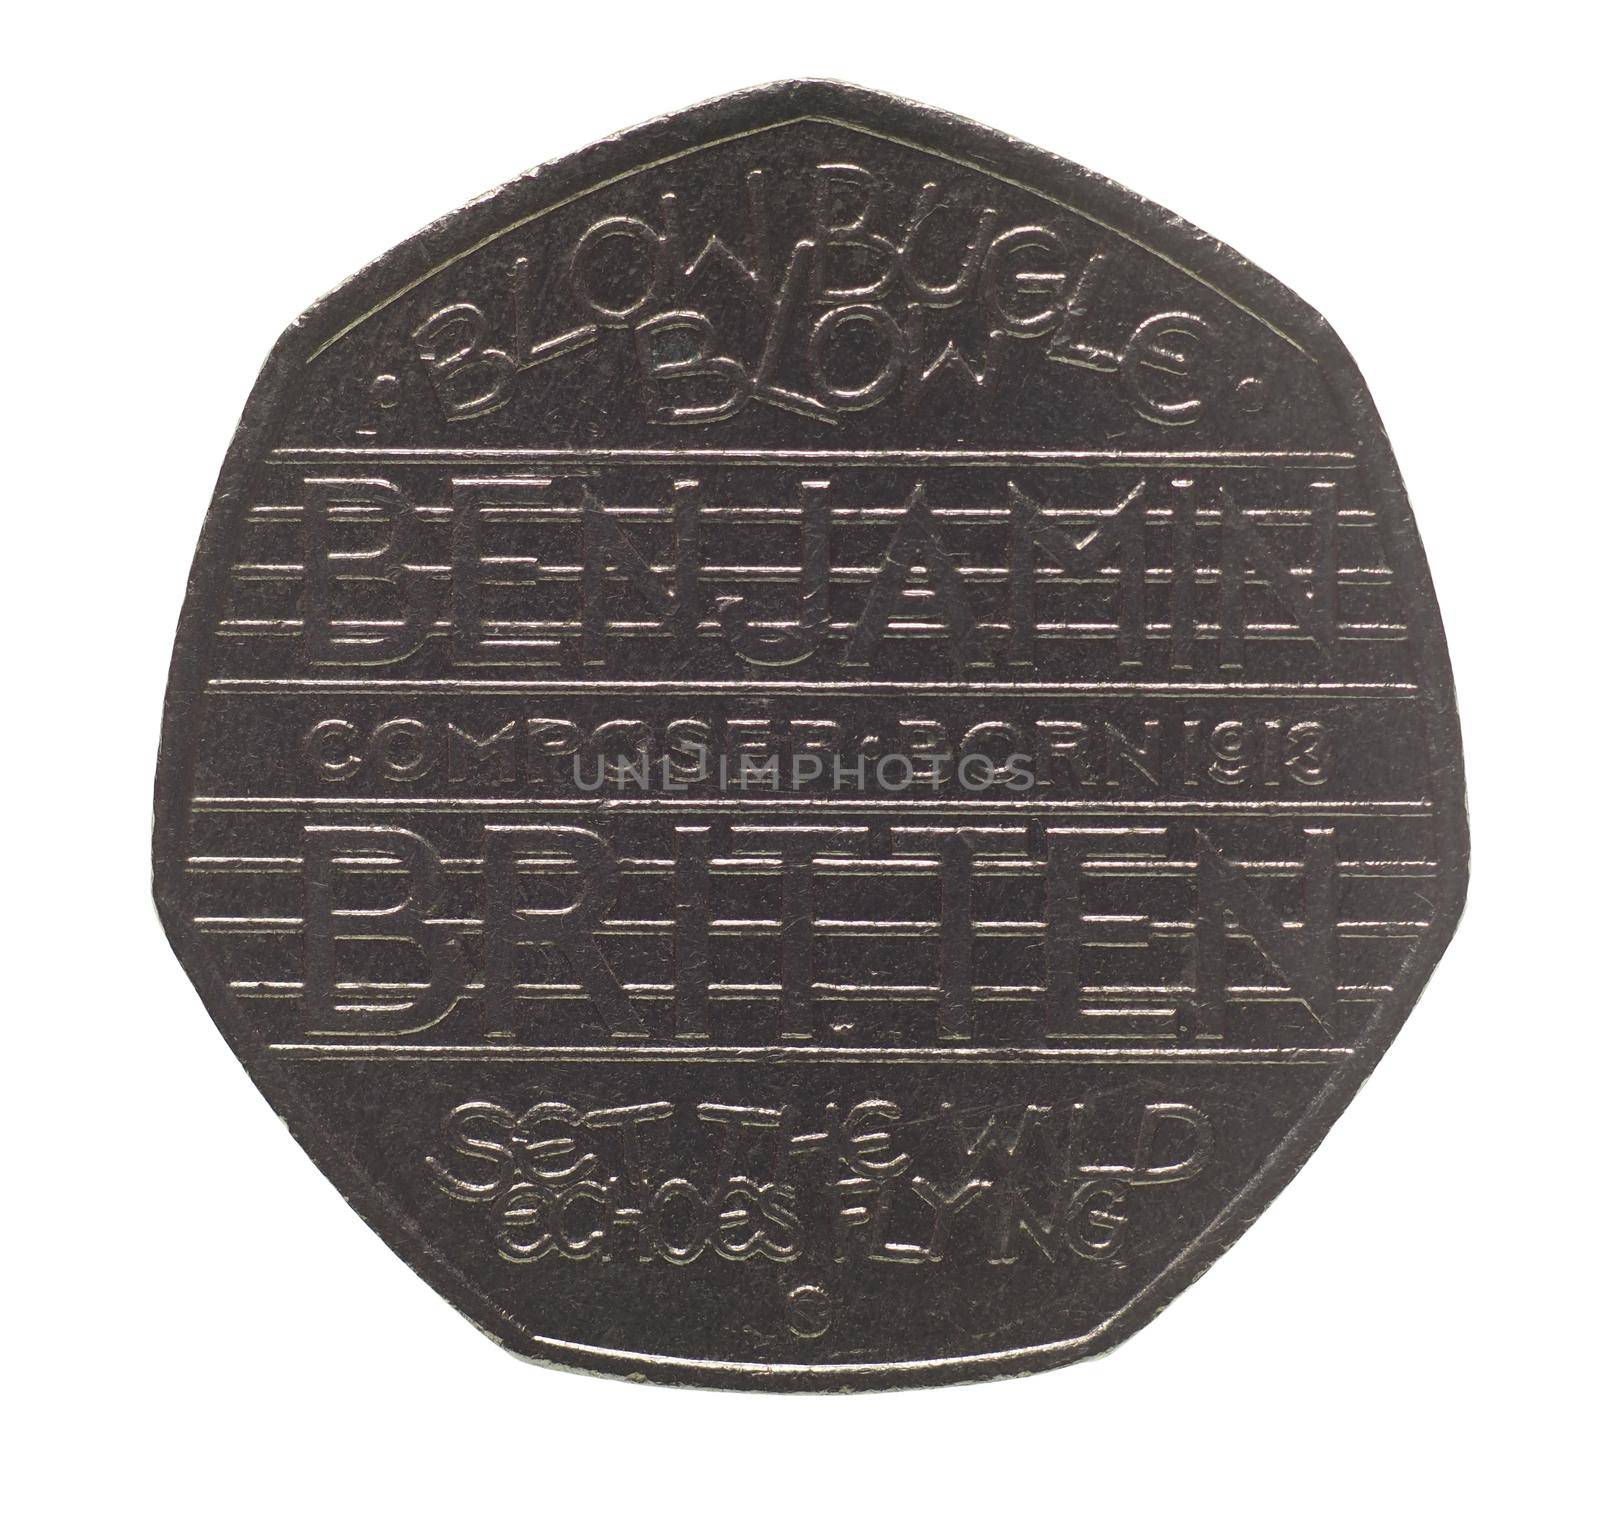 fifty pence coin reverse side, currency of the United Kingdom isolated over white background